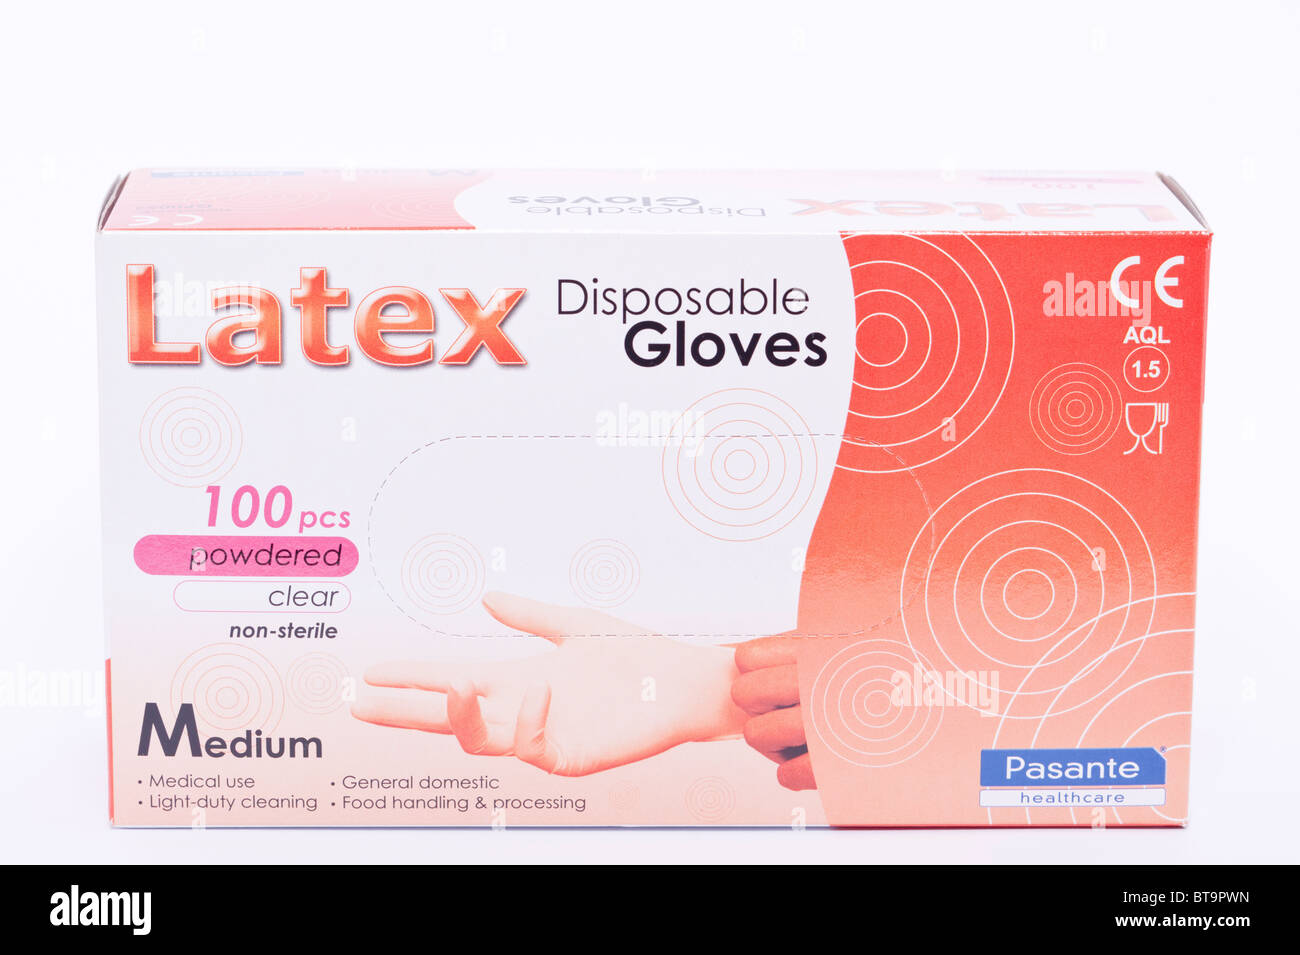 A box of Latex disposable gloves for medical use on a white background Stock Photo